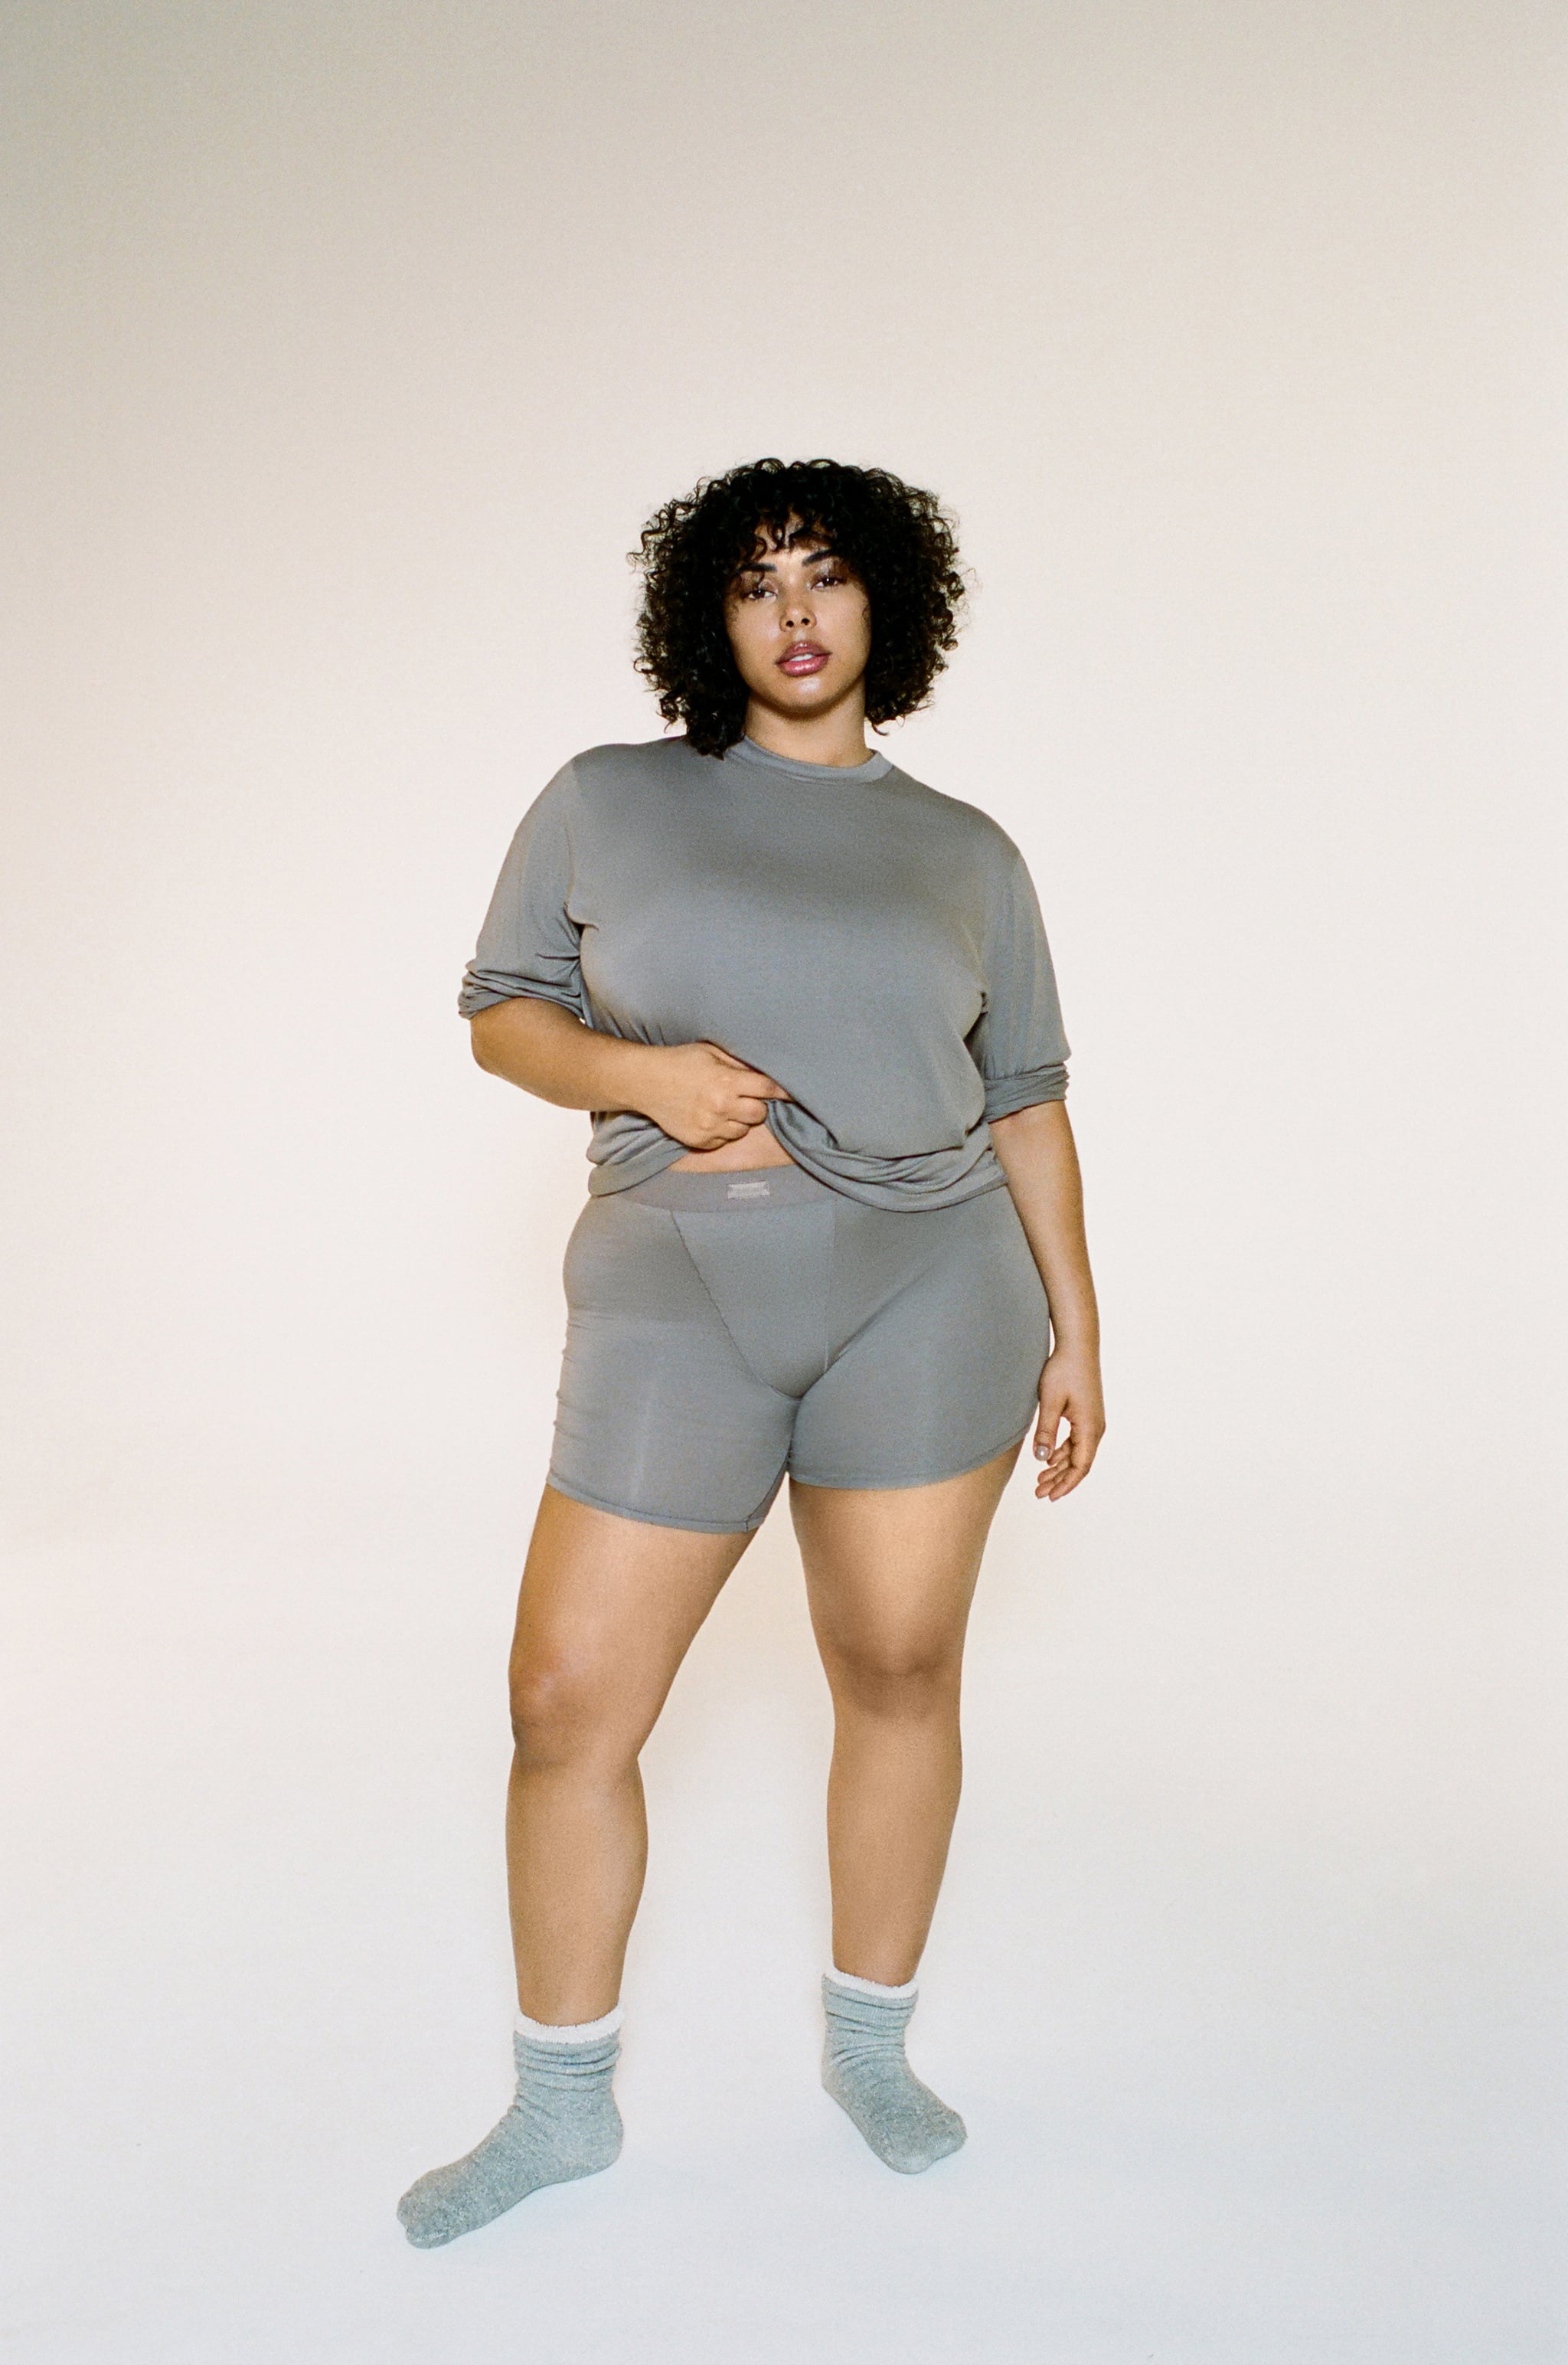 SKIMS - The Boyfriend Long Sleeve T-Shirt and Boxer in Marble — available  now in 11 colors and in sizes XXS - 4X! Shop Boyfriend loungewear: http:// skims.social/fb-boyfriend